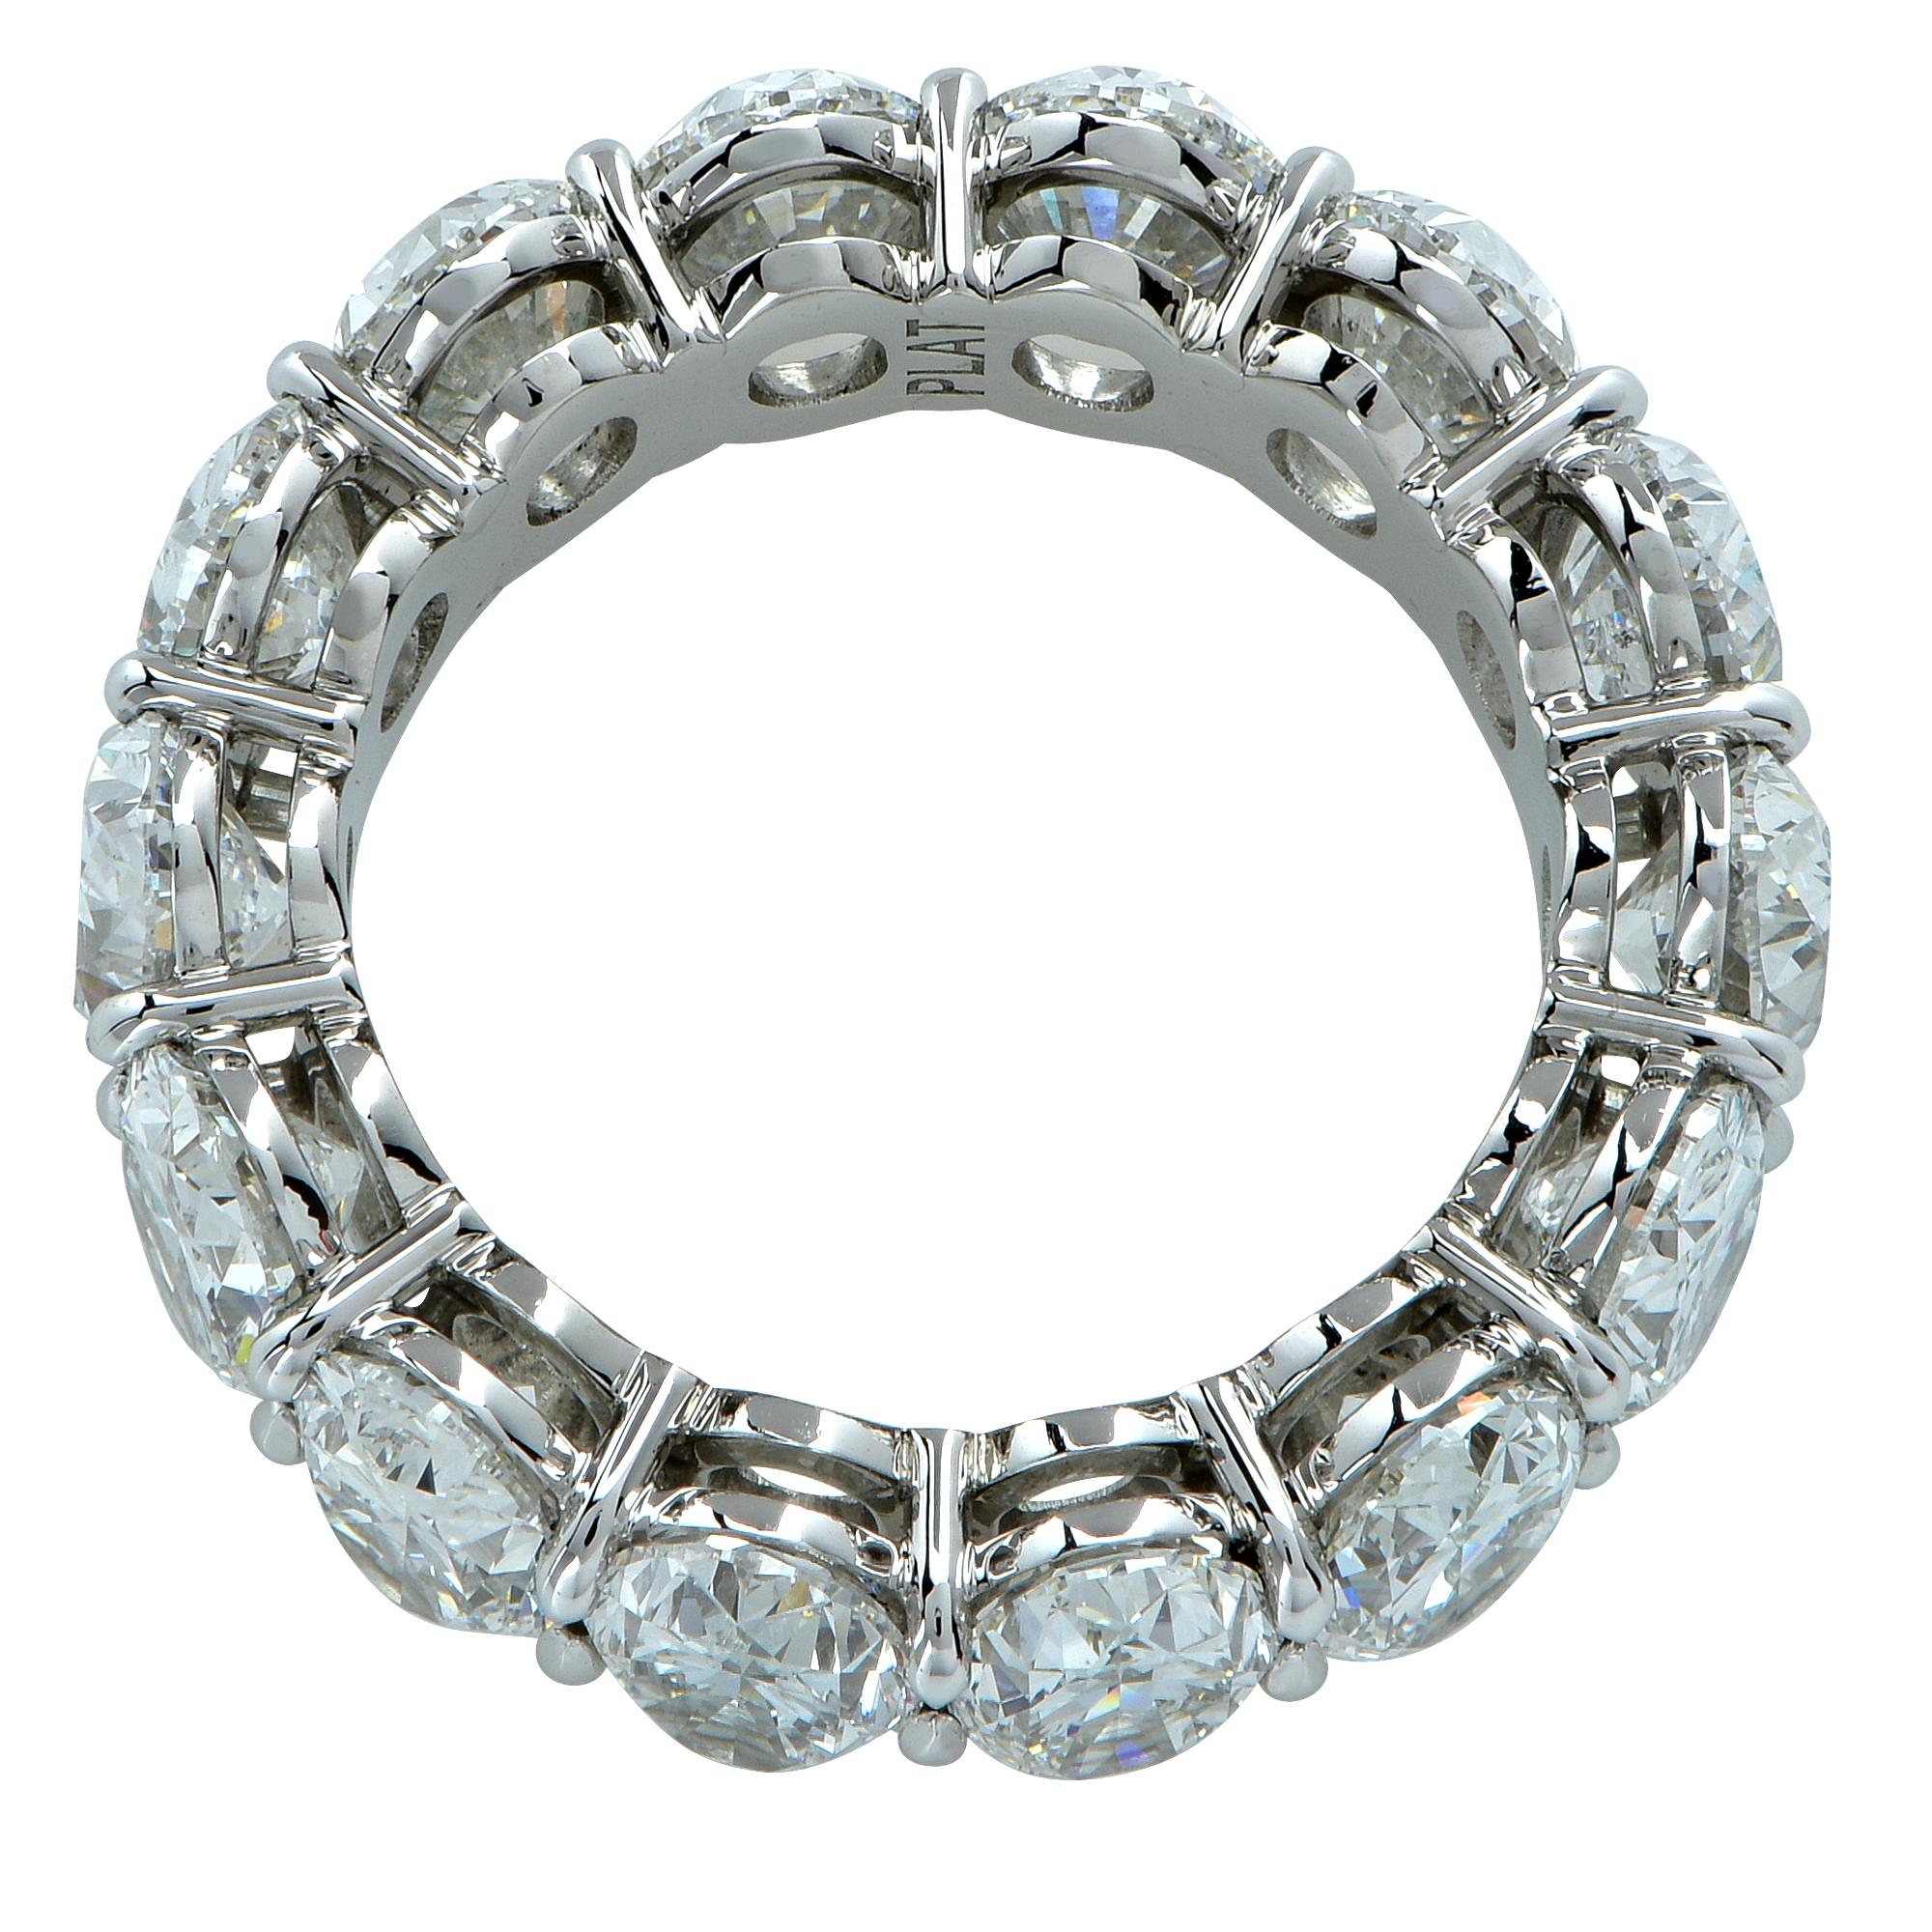 Platinum handmade eternity band featuring 18 oval cut diamonds weighing 4.45cts total D-F color VVS clarity. Each diamond carat weight averages at .24ct.

The ring is a size 6.25.
Measurements are available upon request.
It is stamped and/or tested